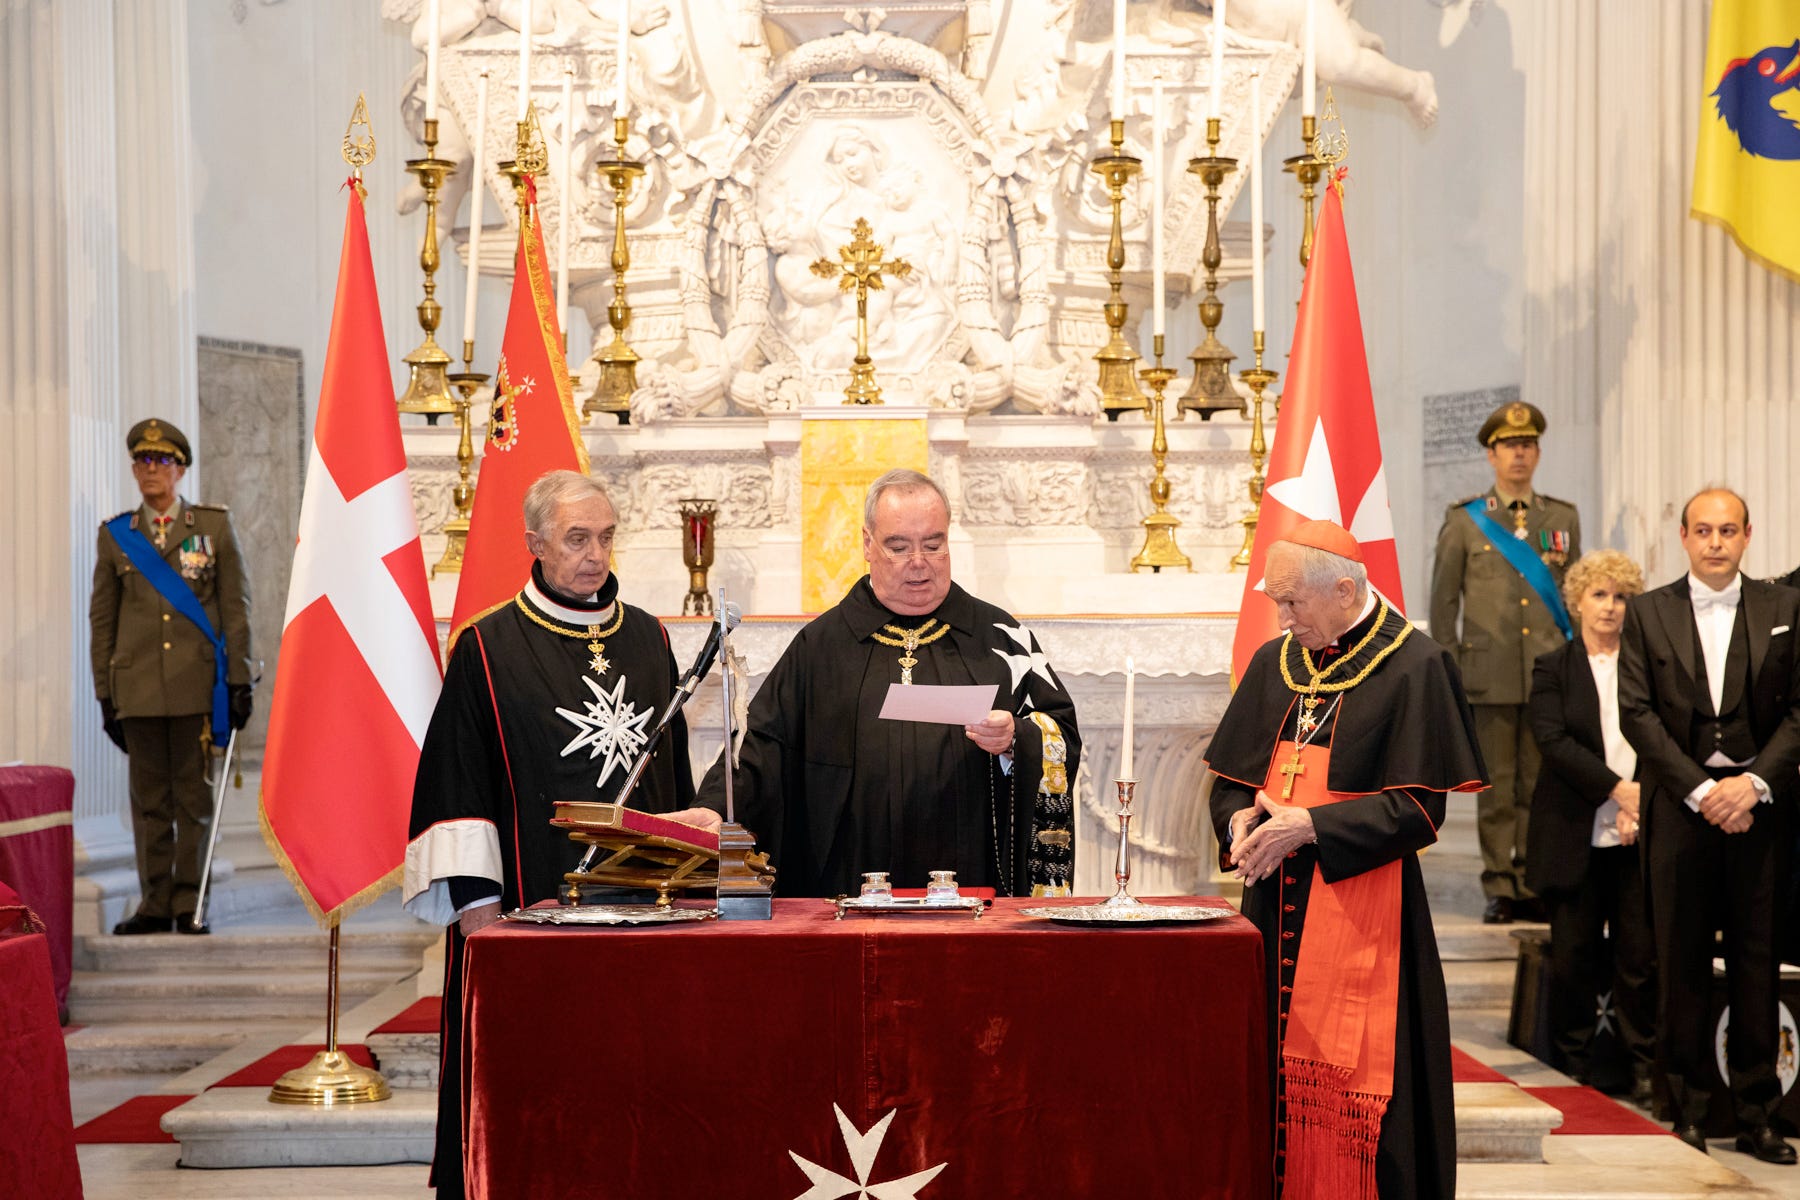 The Grand Masters - Sovereign Order of Malta